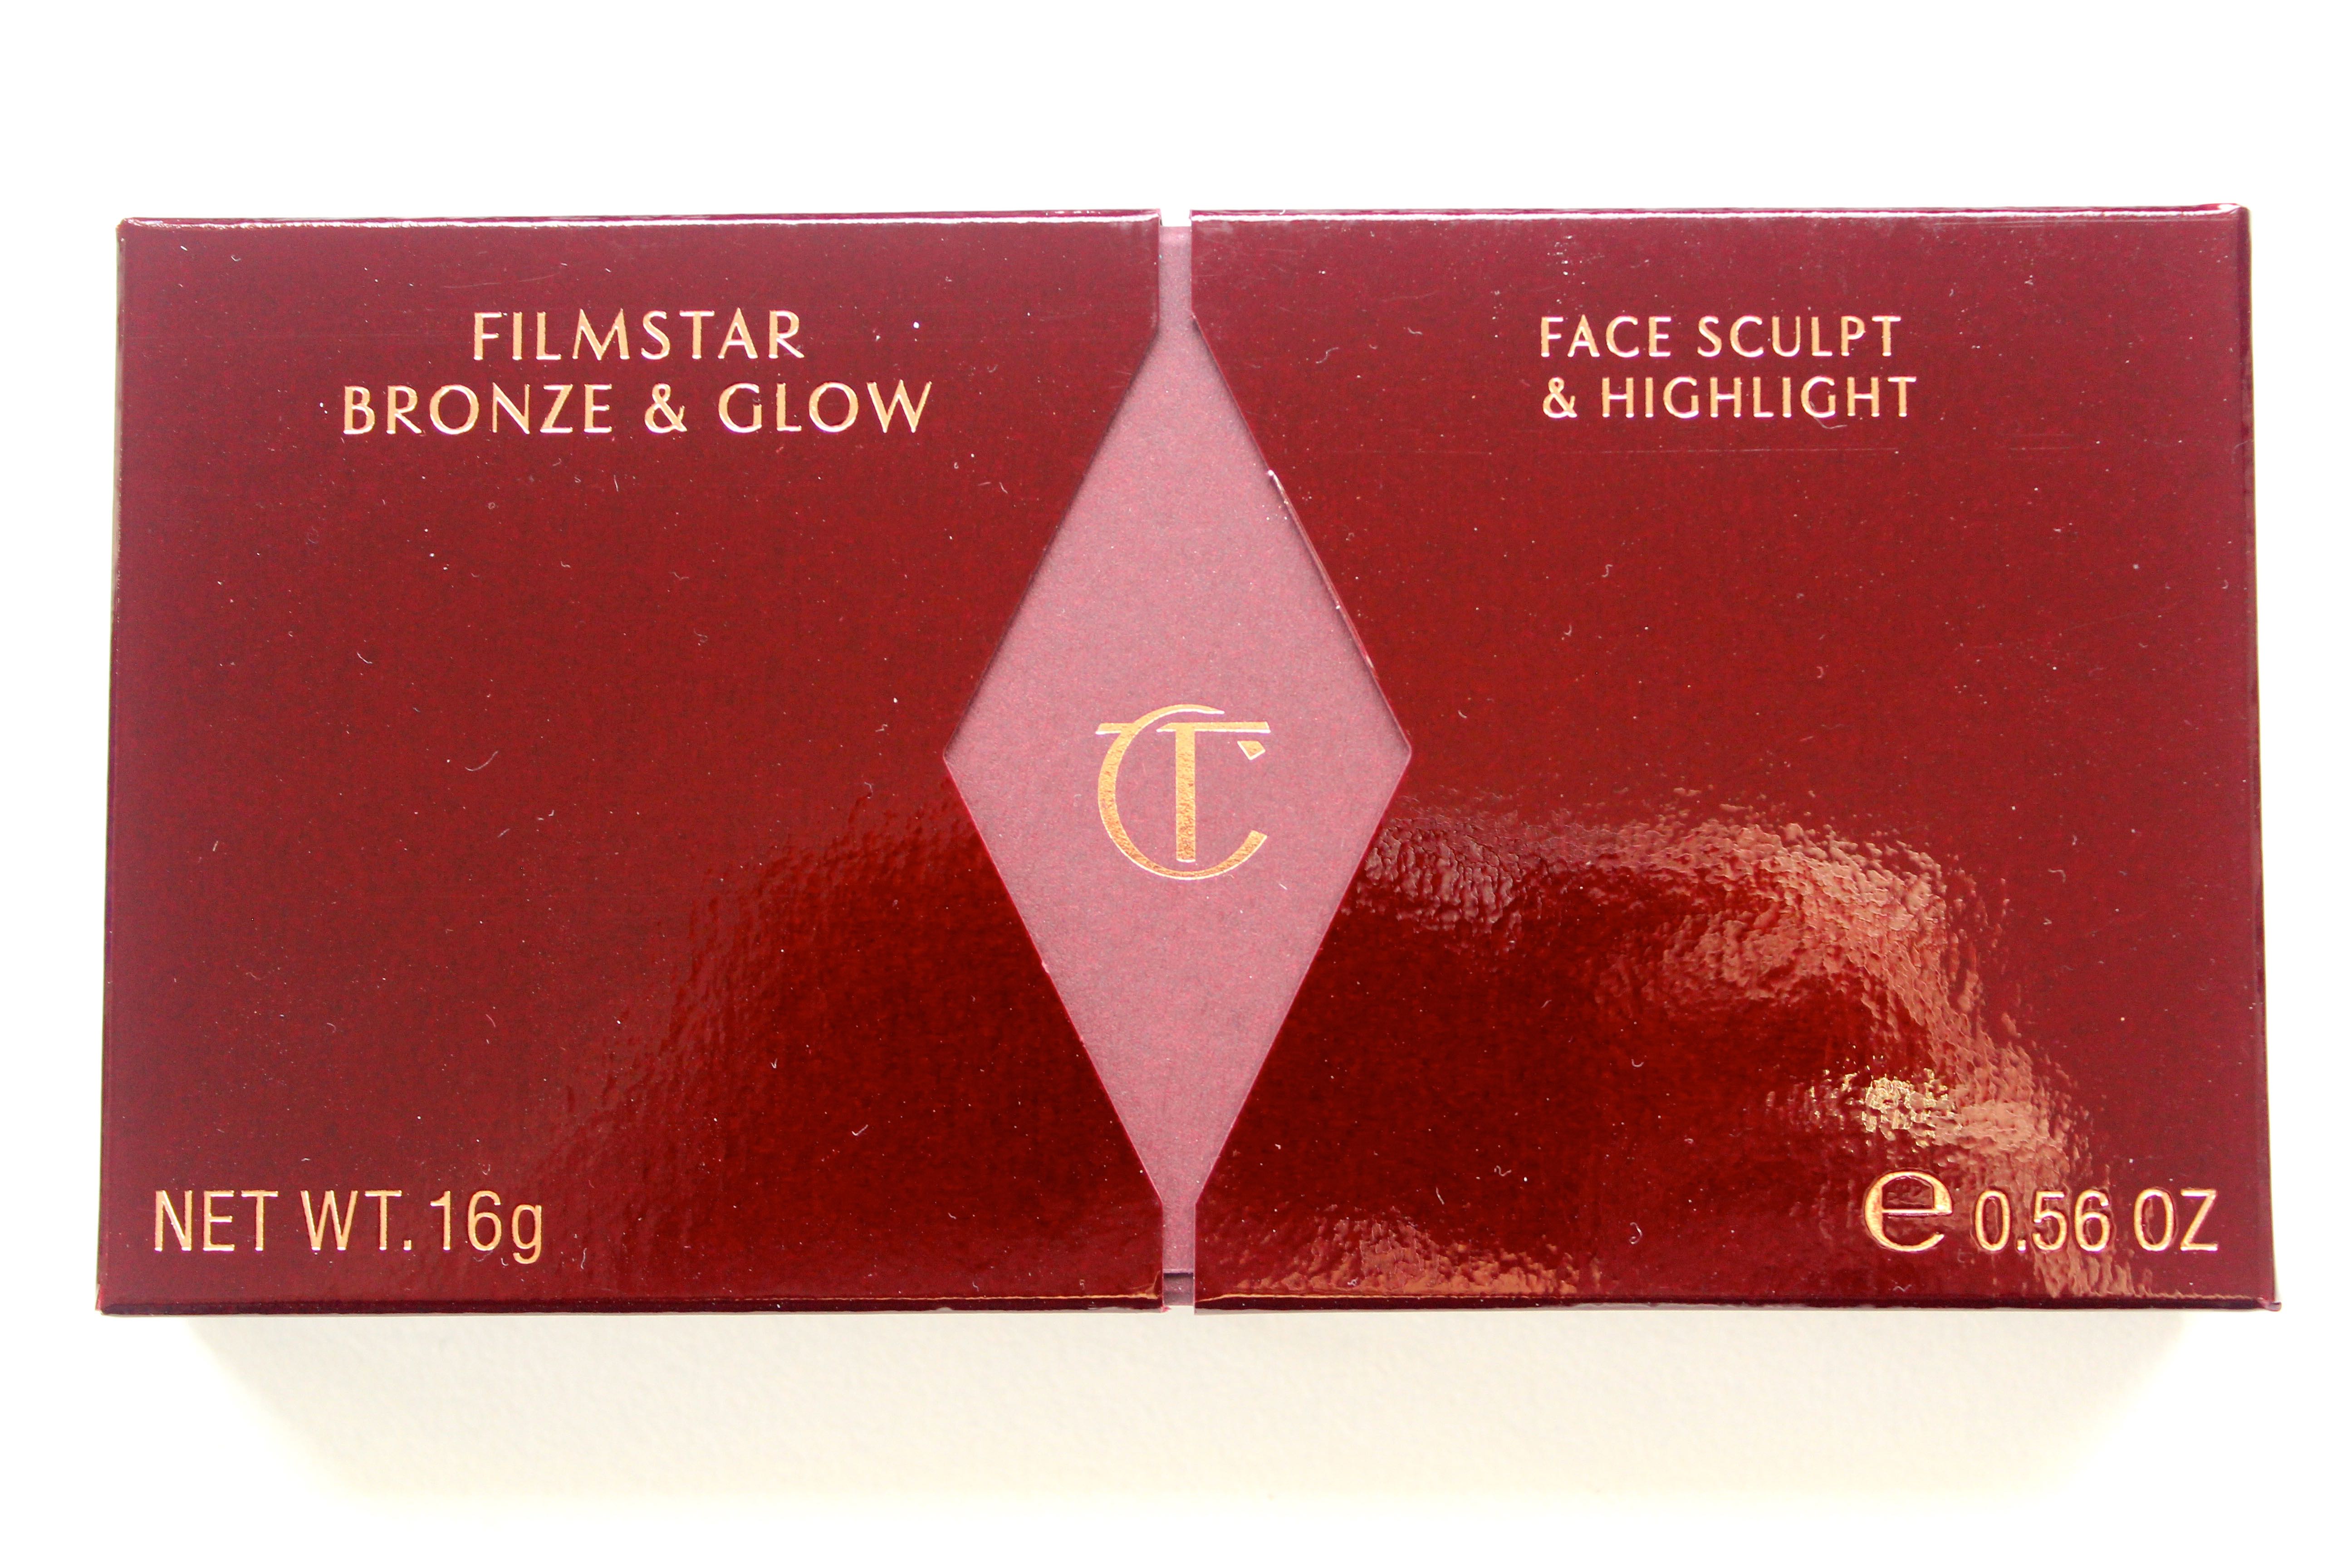 Charlotte-Tilbury-haul-and-product-review-all-in-one-the-infamous-Filmstar-Bronze-and-Glow-up-by-face-made-up-facemadeup